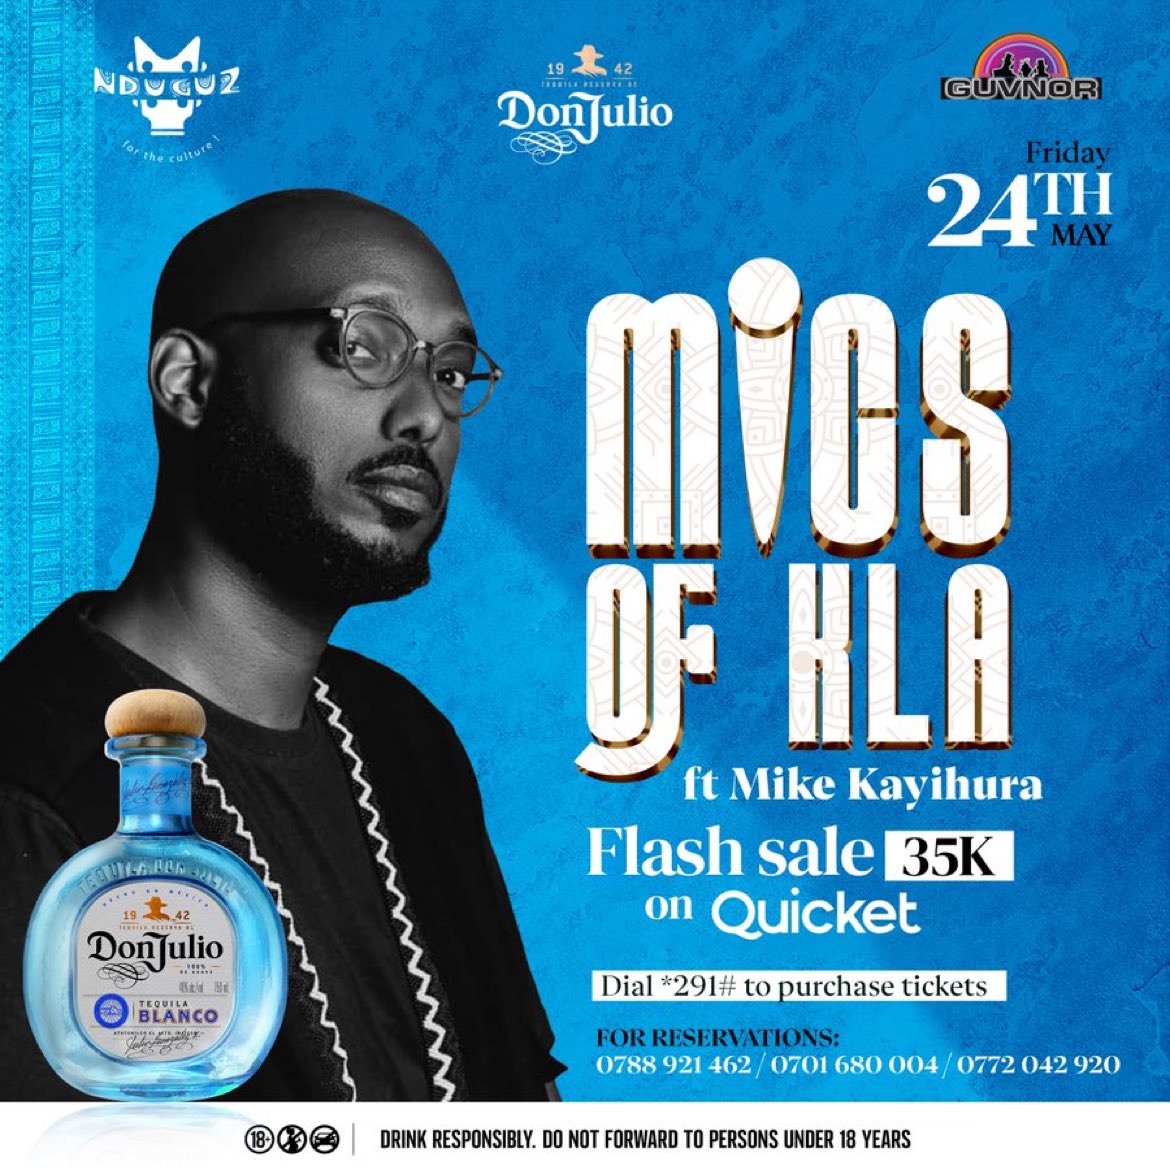 The amazing #MicsOfKLA featuring Mike Kayihura is coming to town on Friday, the 24th! We are offering flash sale tickets for just 35k. Don't waste any time, grab your tickets now at qkt.io/MicsOfKlaftMike #MikeInGuvnor